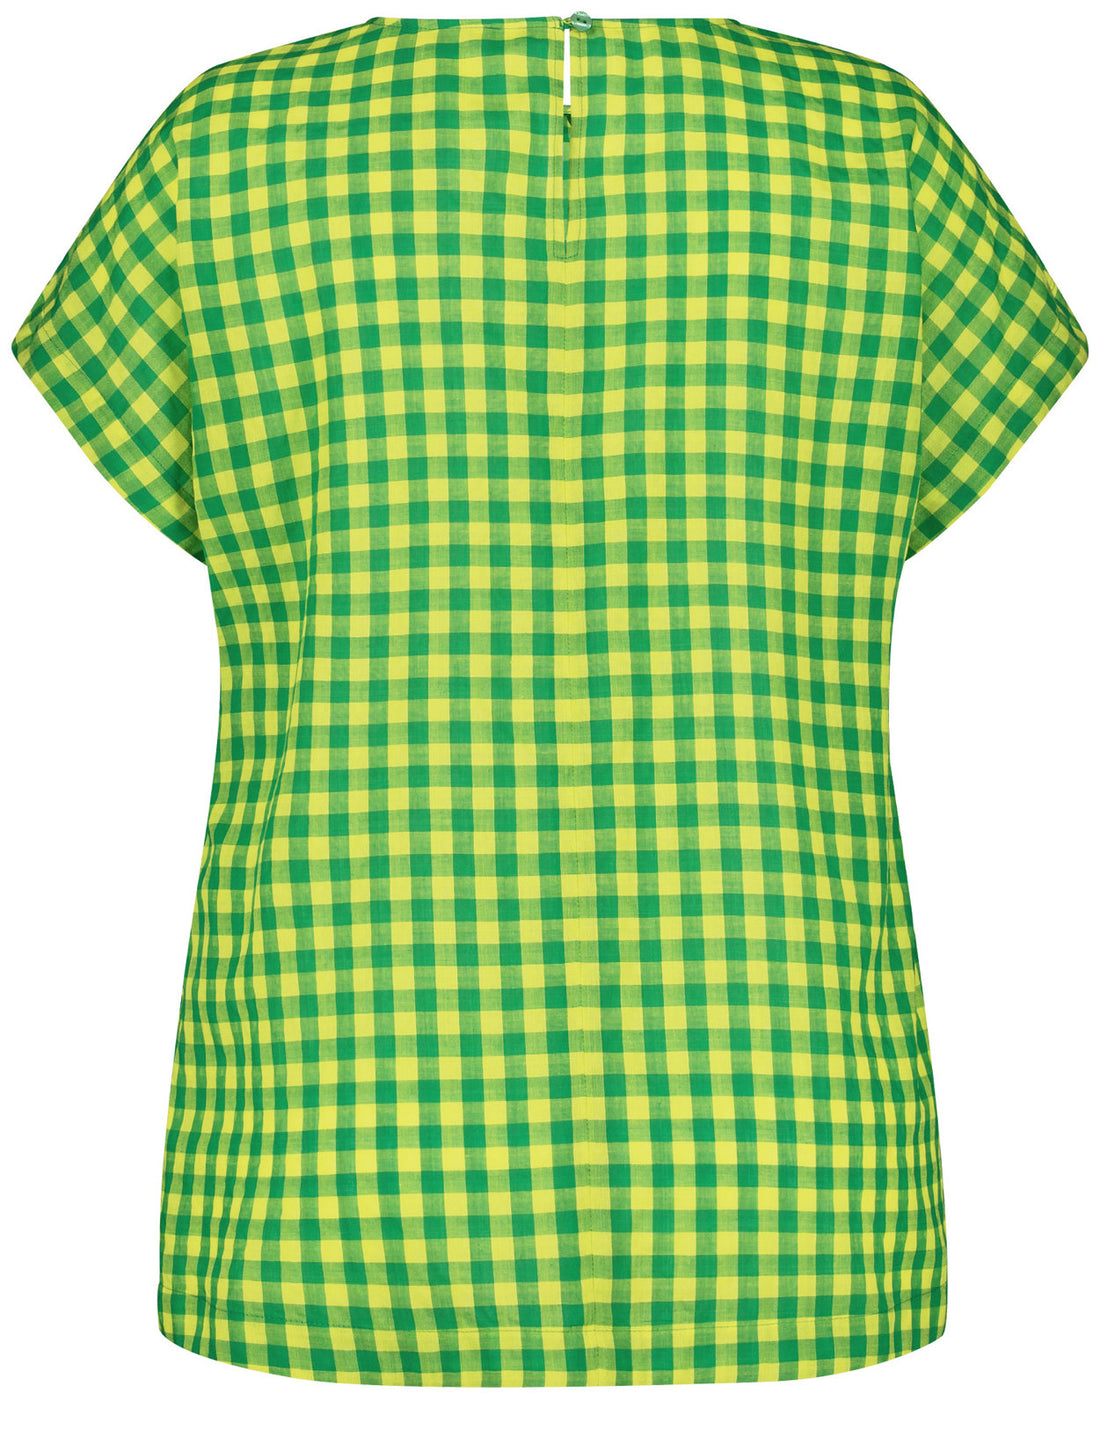 Blouse Top With A Check Pattern_460036-21061_5092_02